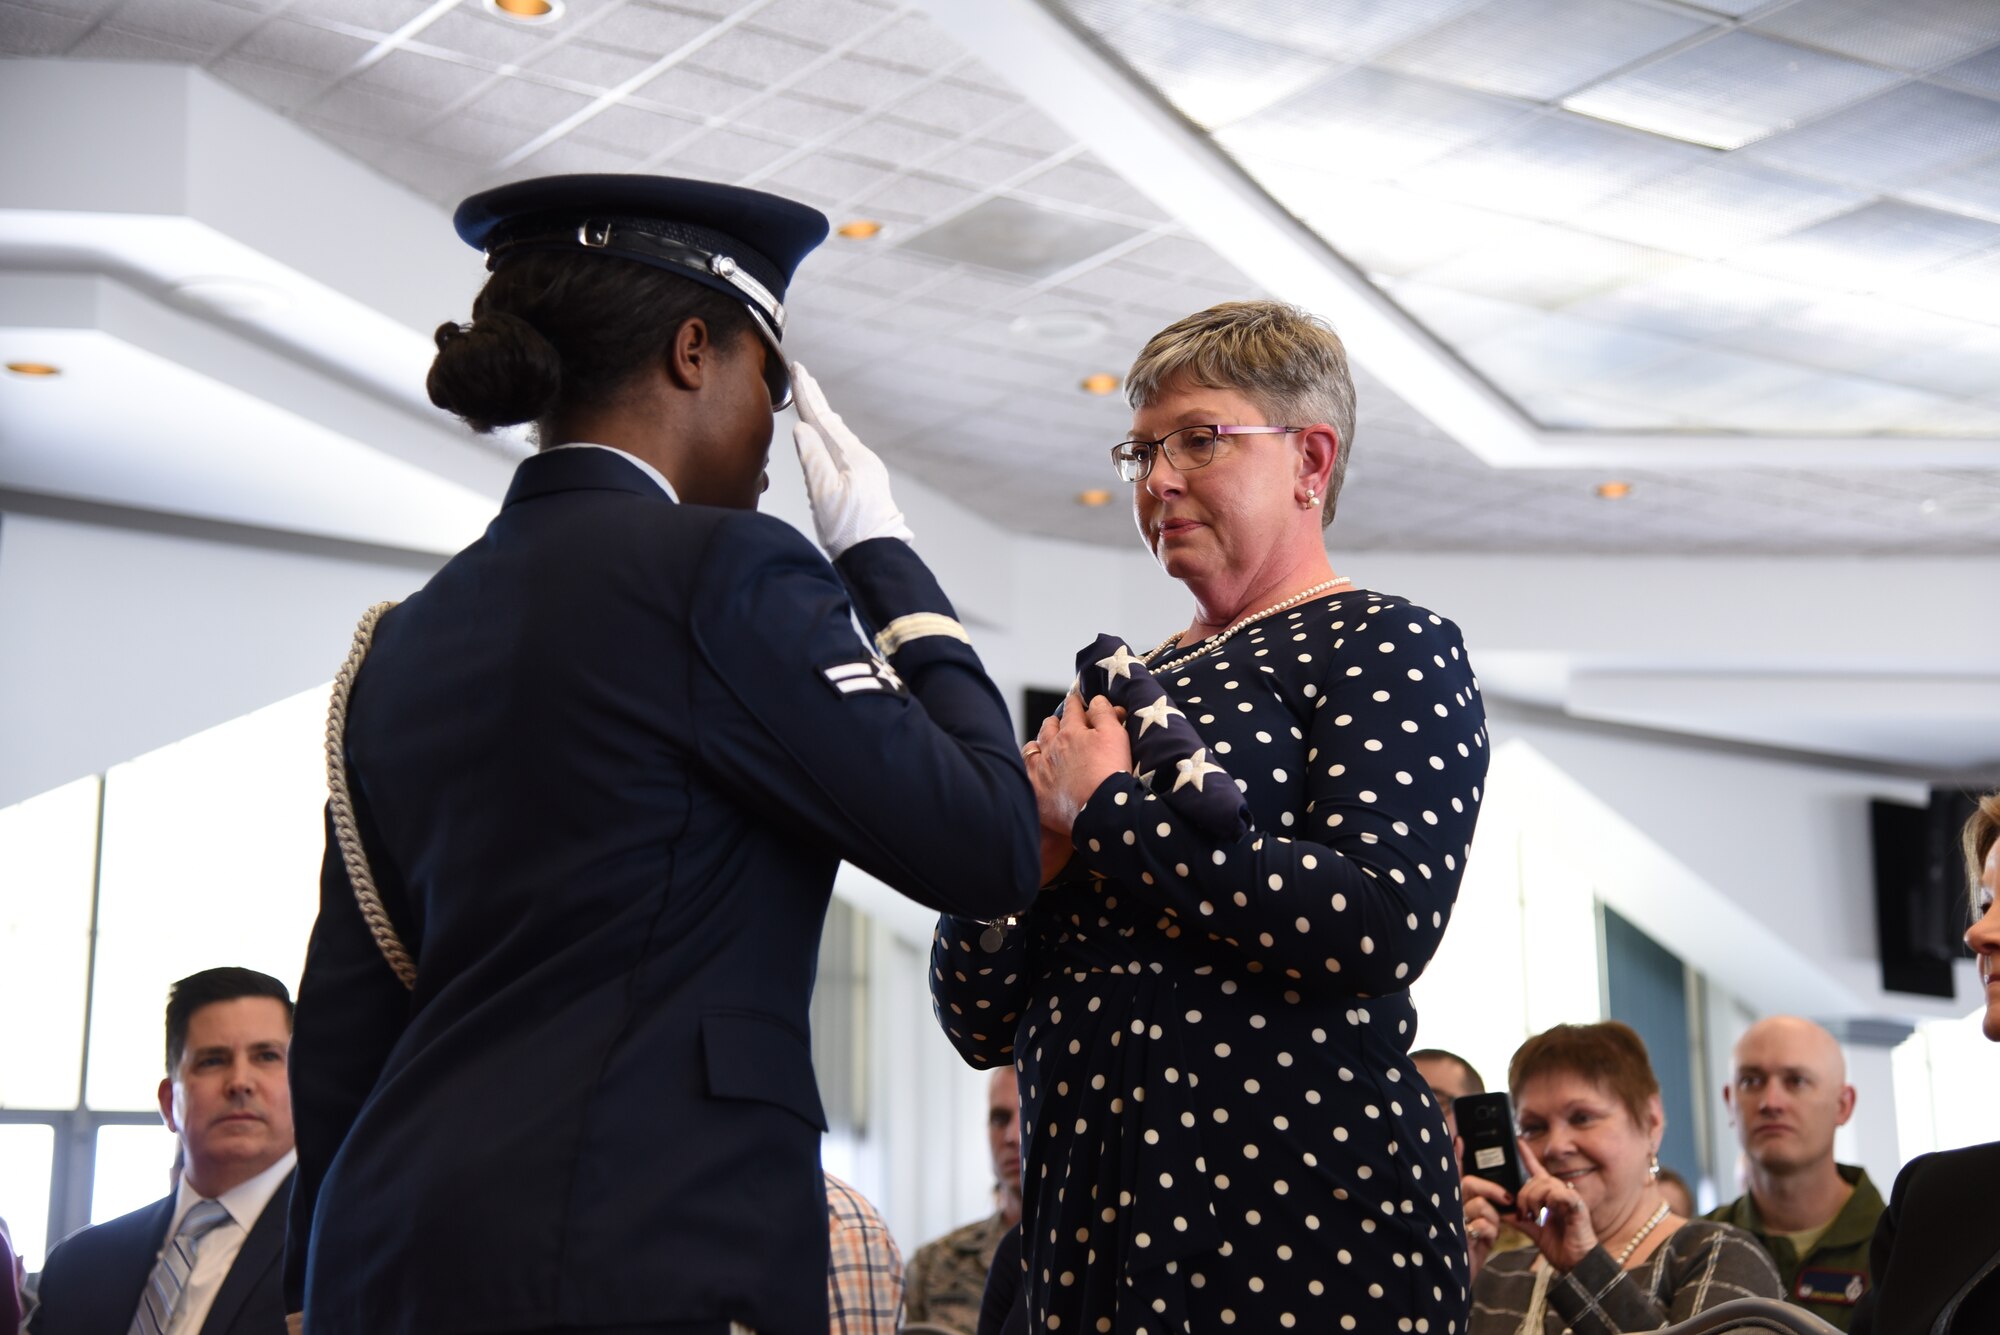 A 90th Missile Wing honor guard member presents the American flag to Tennie Good during her husband’s retirement ceremony March 5, 2019, at F. E. Warren Air Force Base, Wyo. Chief Master Sgt. Thomas F. Good, 20th Air Force command chief, retired as the 20th Air Force command chief in the presence of his wife, children and friends. (U.S. Air Force photo by Senior Airman Nicole Reed)